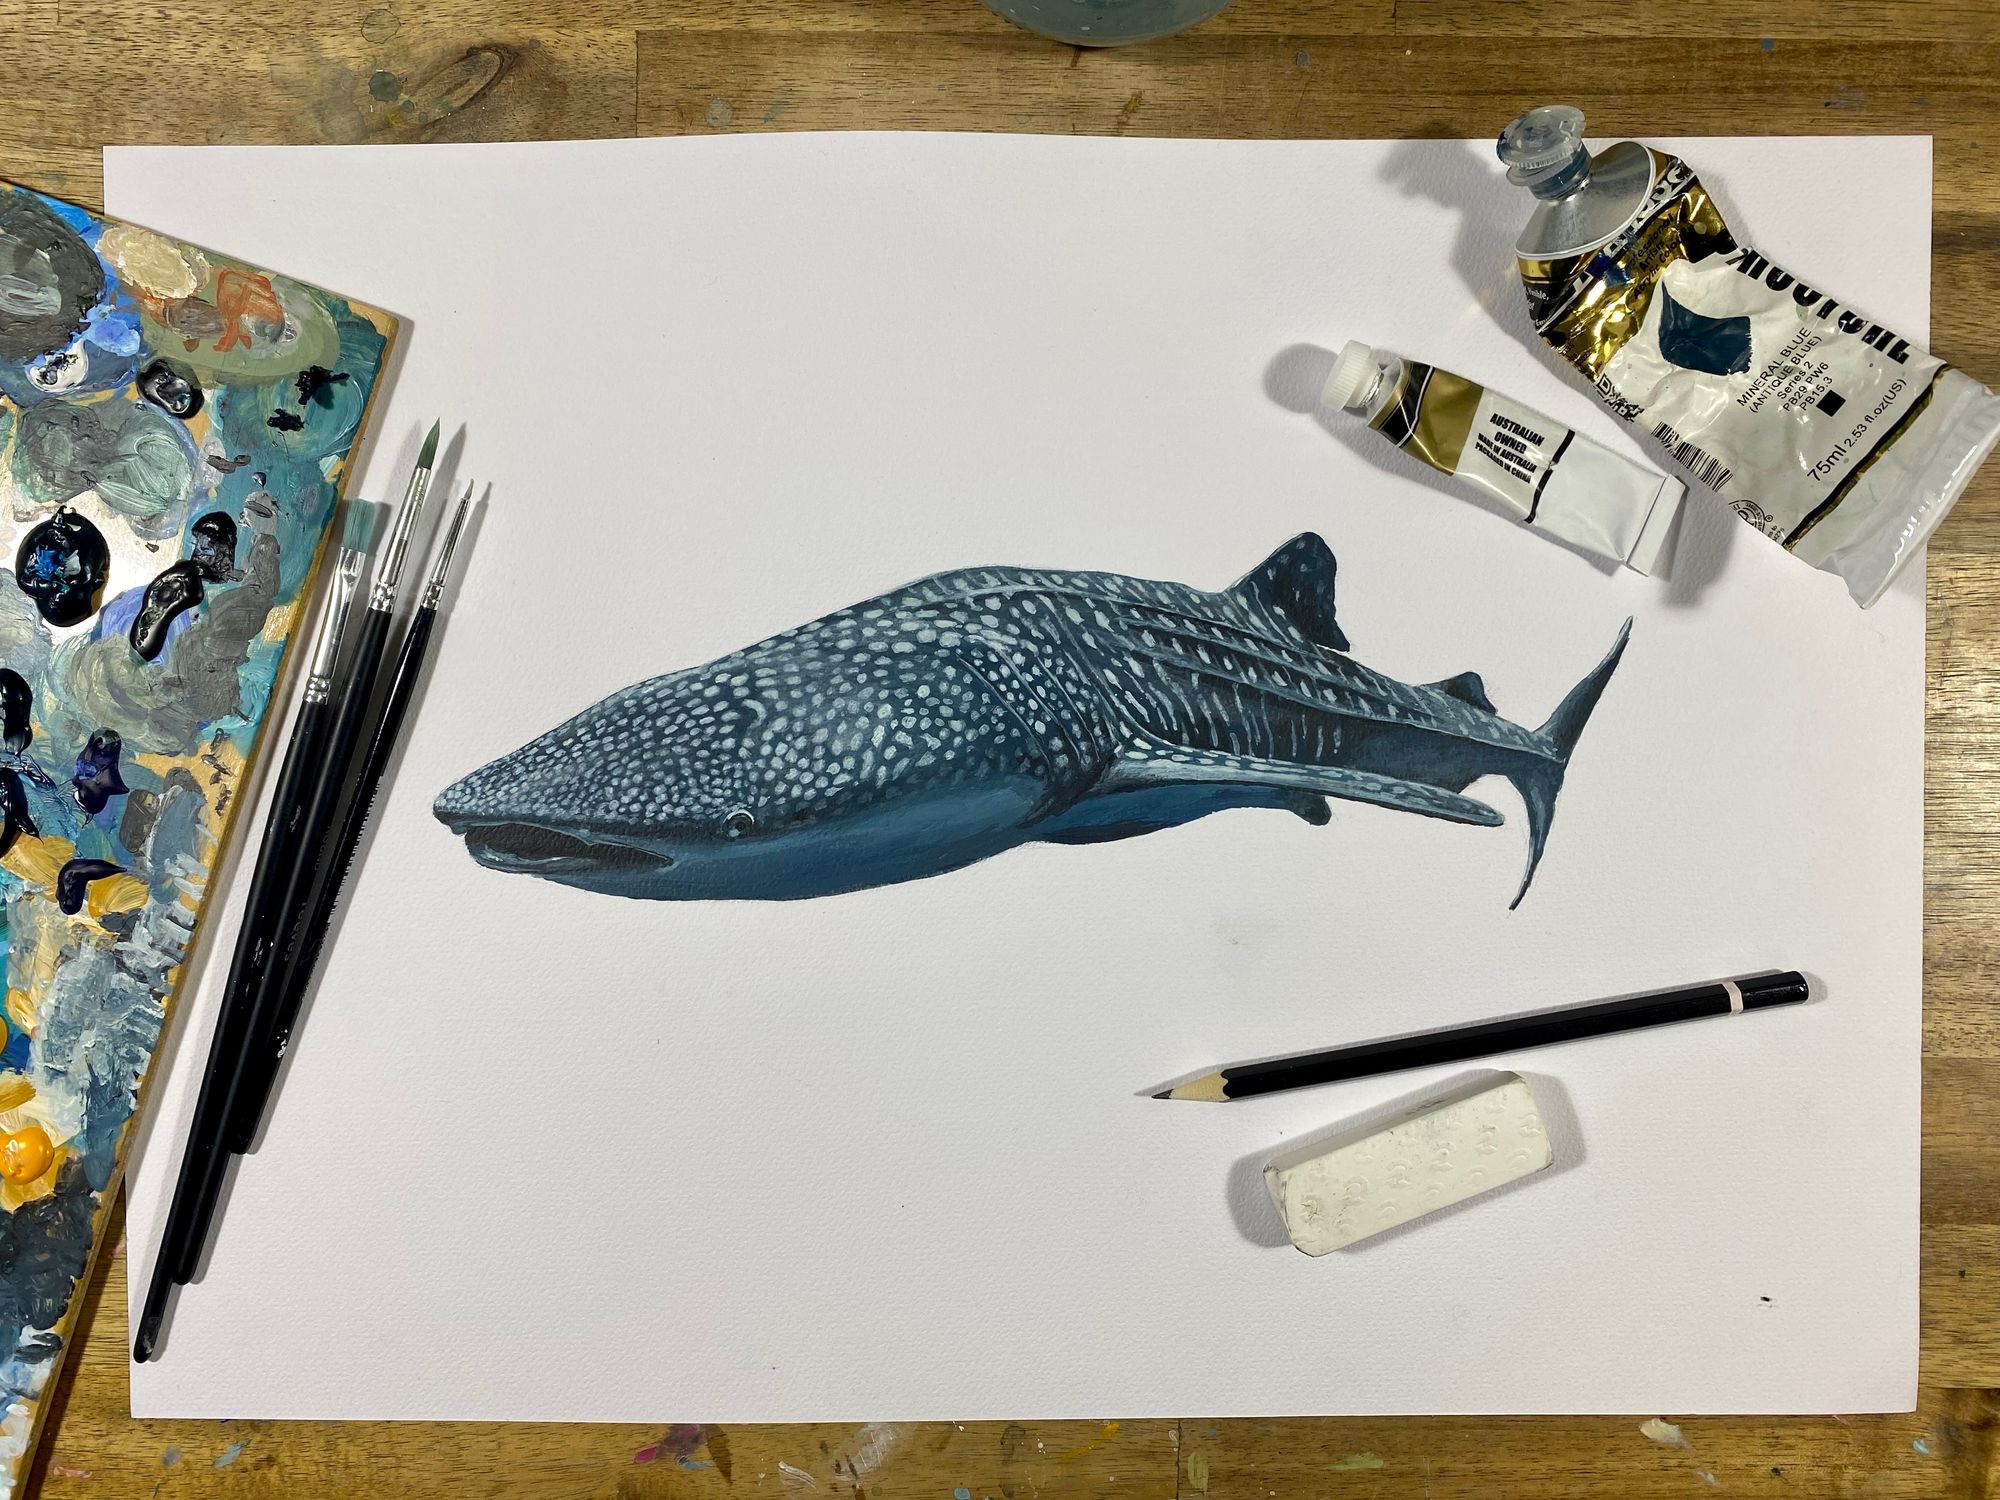 "Willow the Whale Shark" update